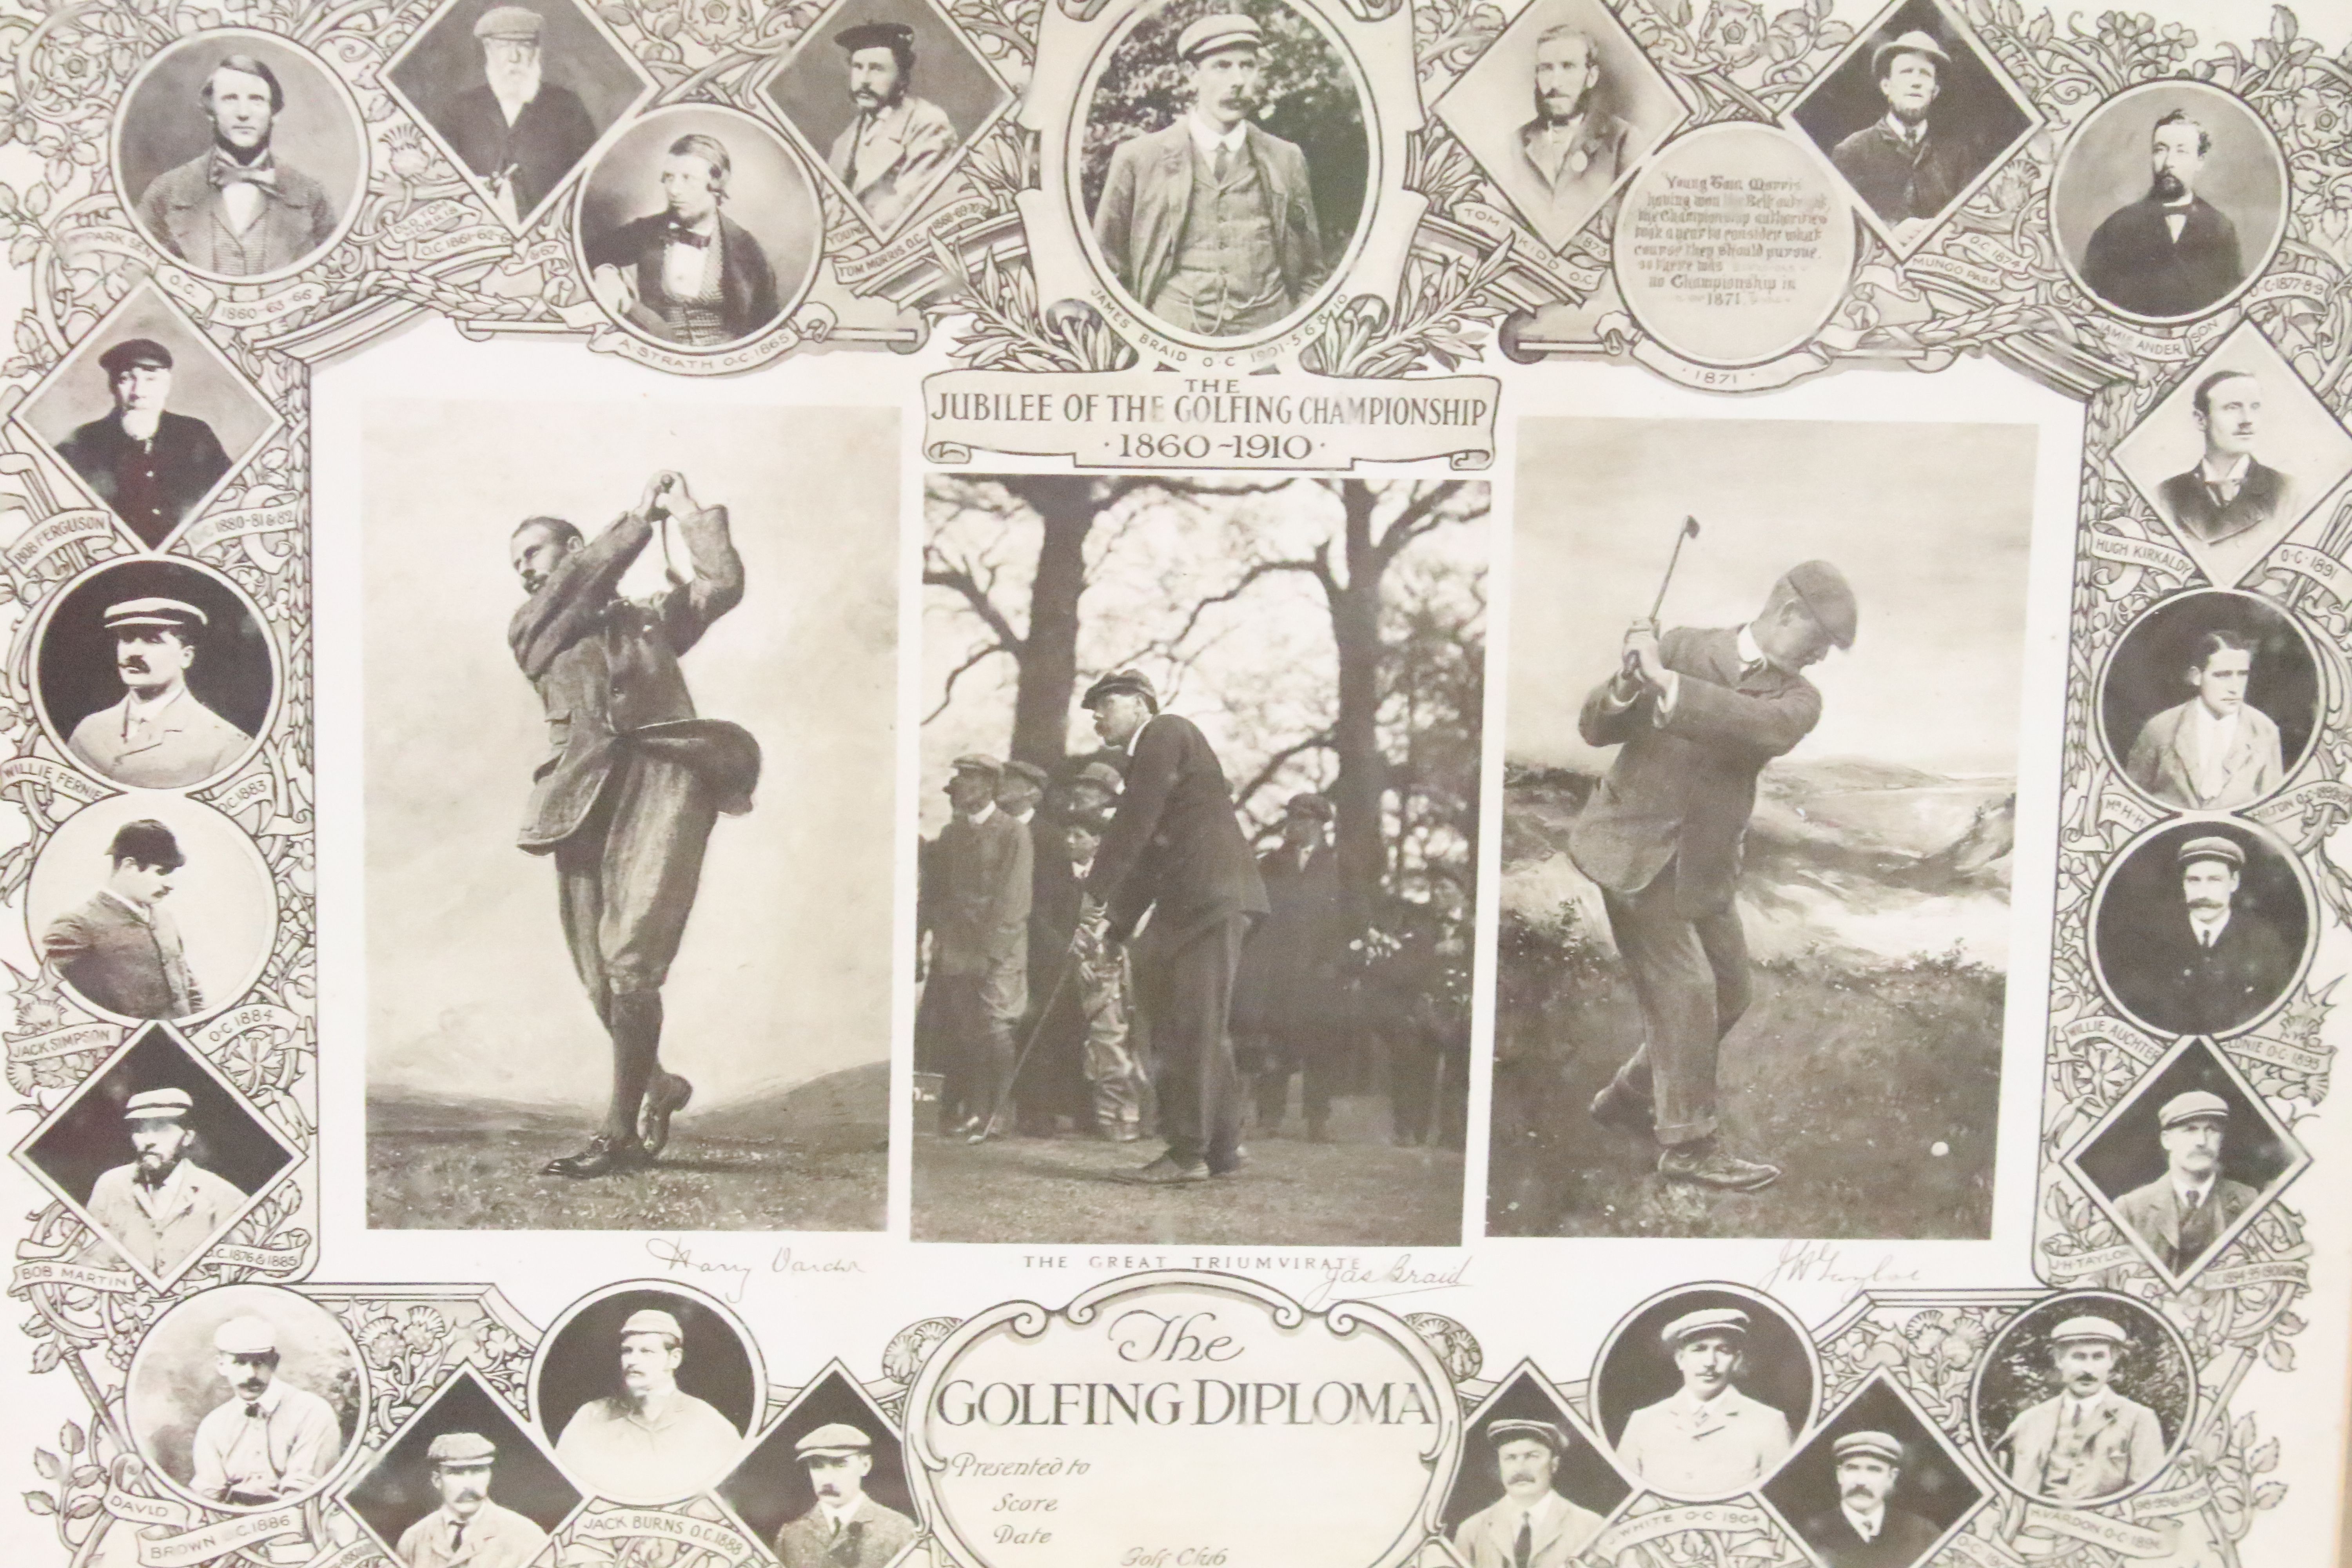 The Golfing Diploma, The Jubilee of The Golfing Championship 1860--1910, sepia print, 40 x 52.5cm, - Image 2 of 3